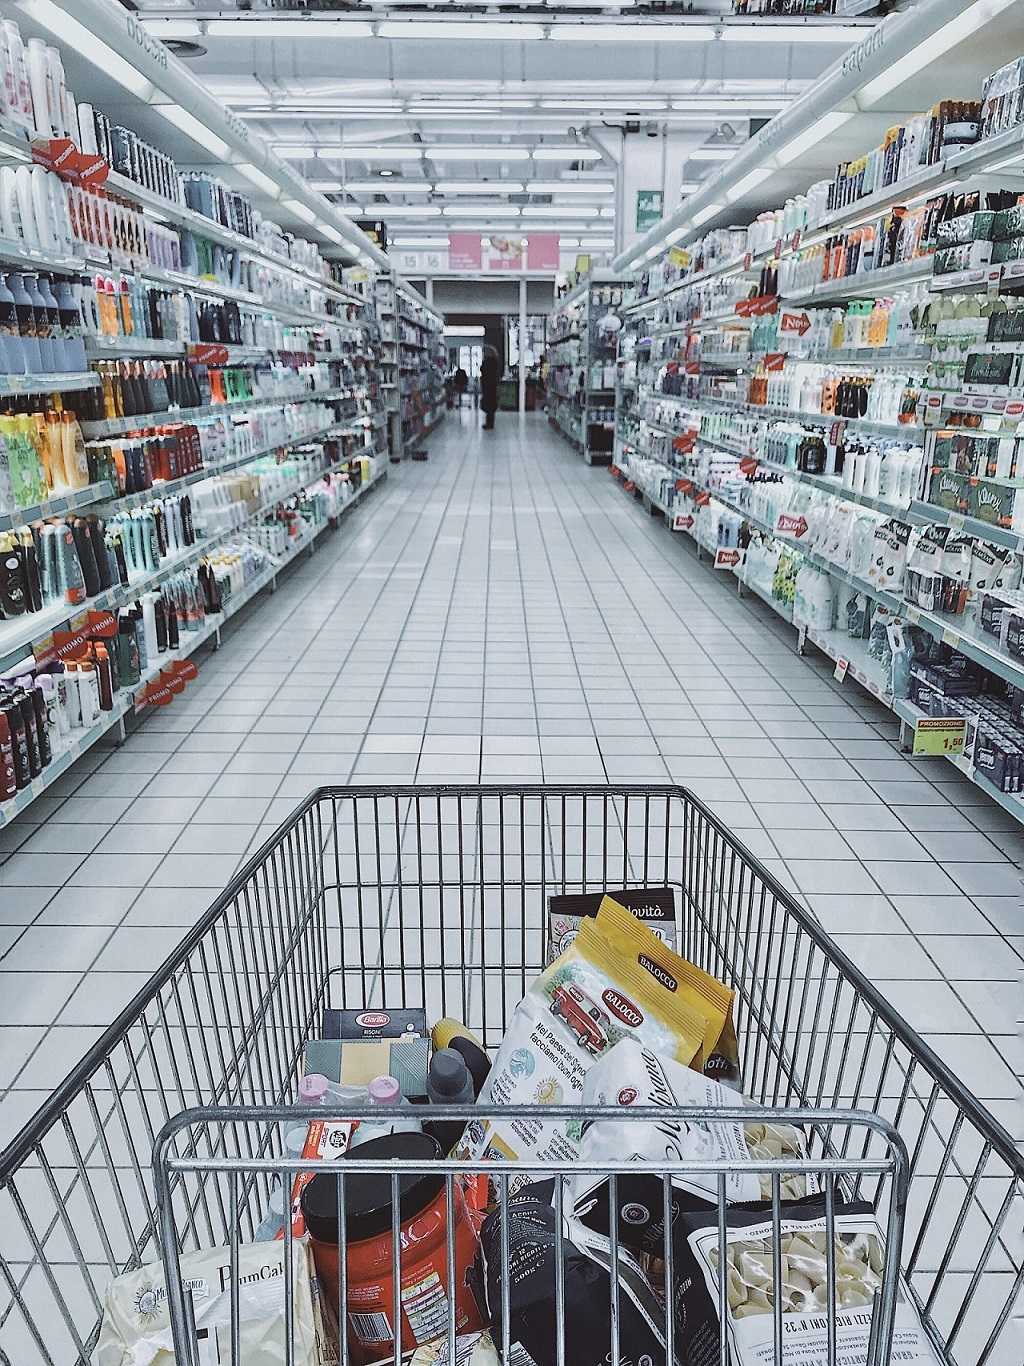 shopping cart in supermarket aisle